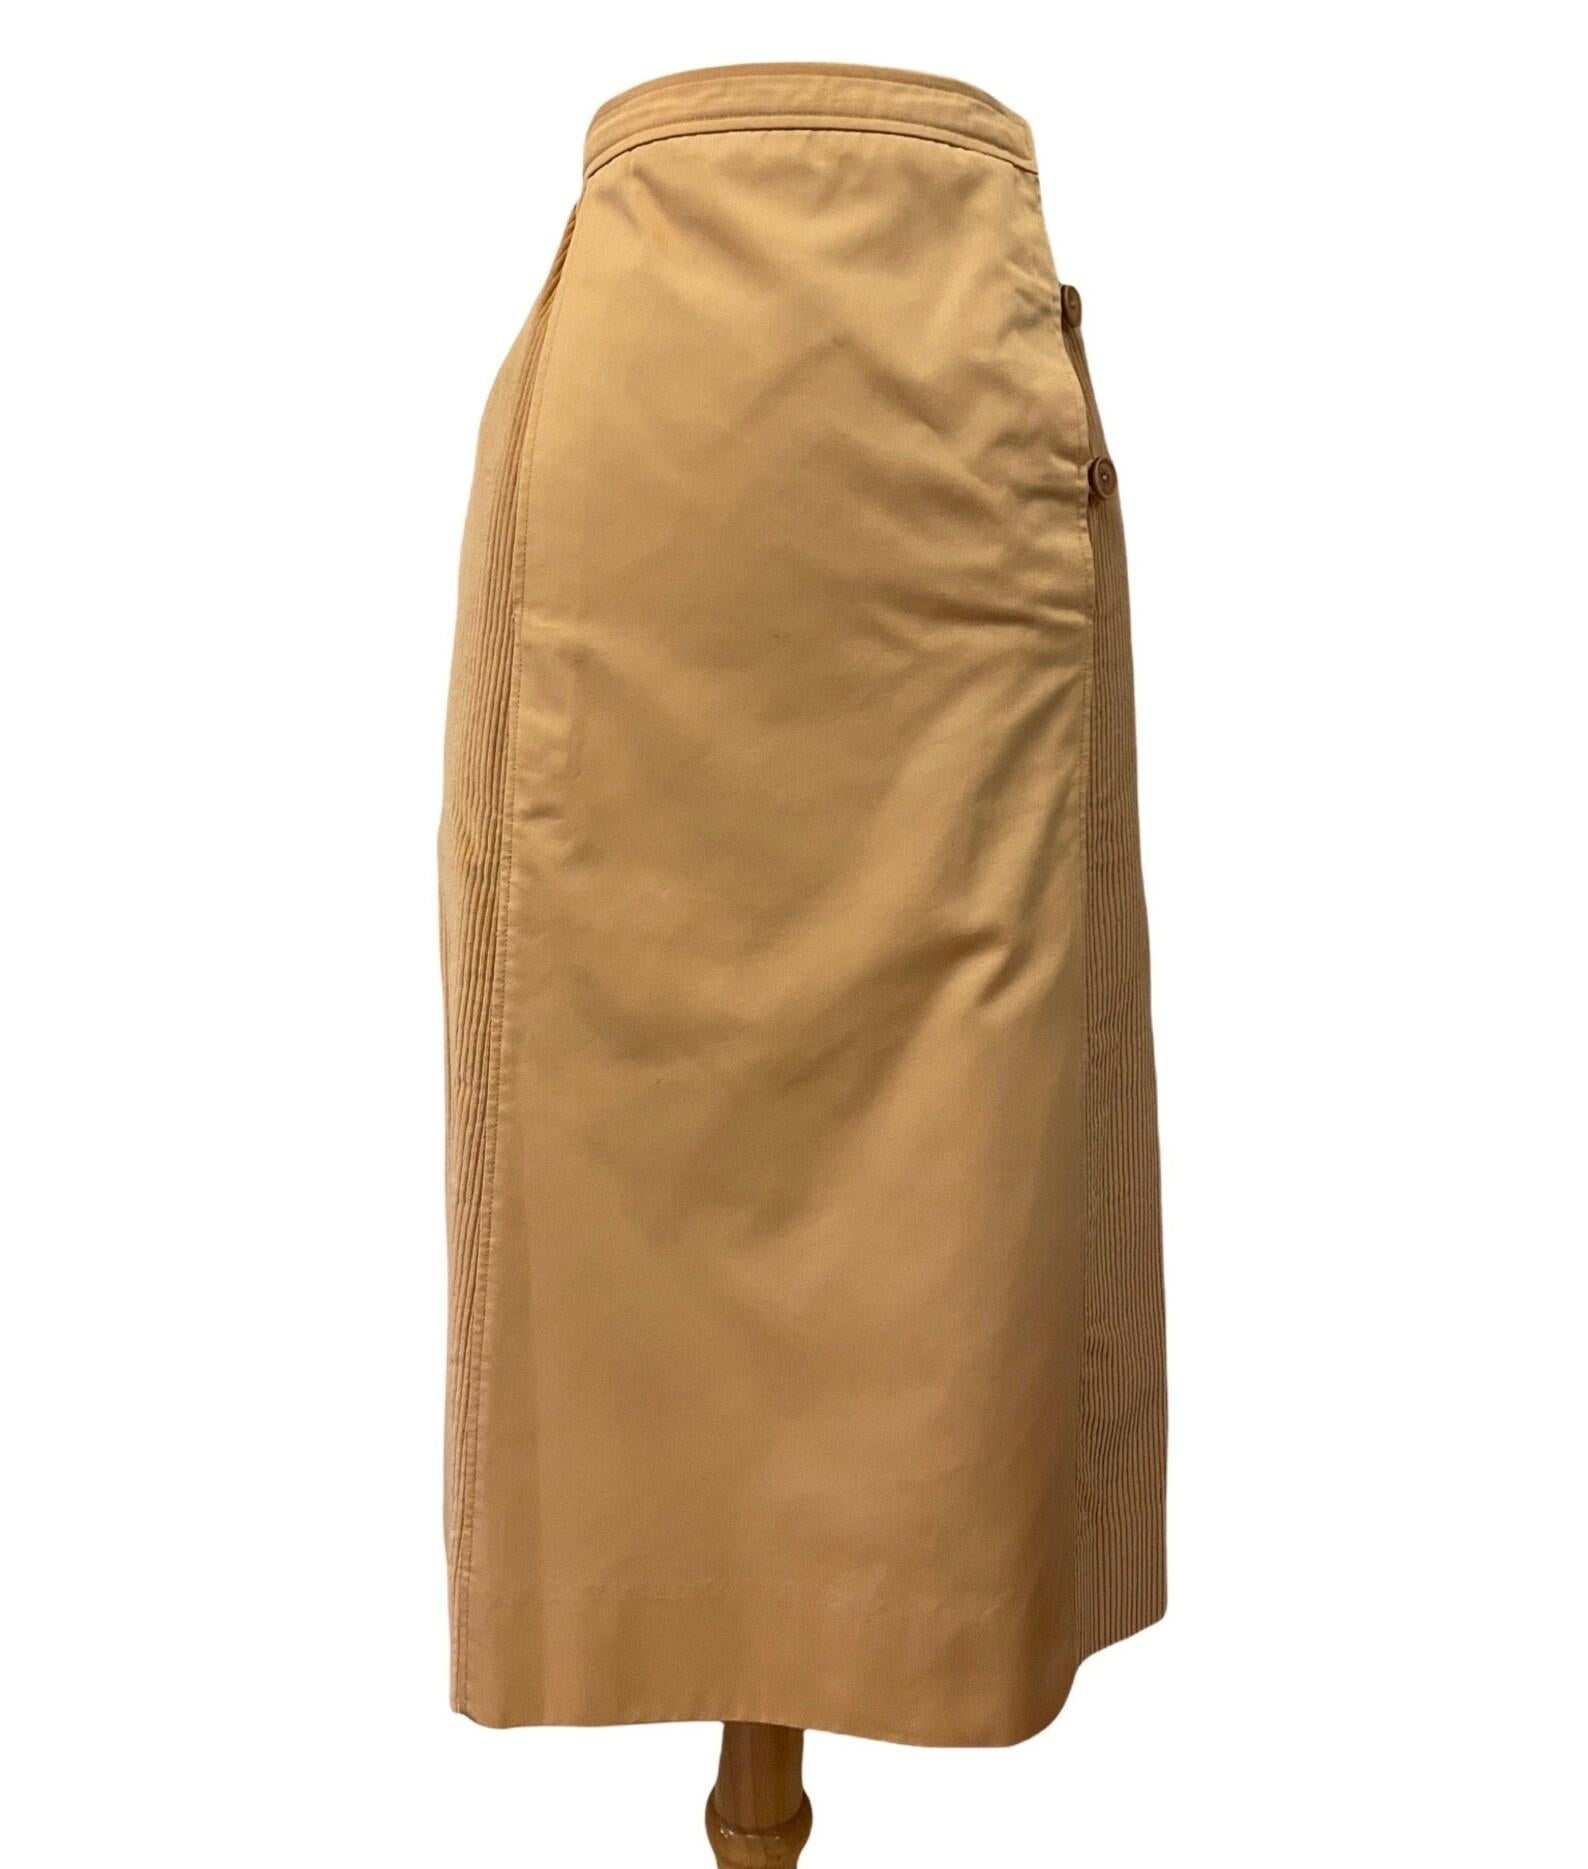 Vintage Courrèges beige corduroy and cotton poplin pencil skirt. high waist. a-line silhouette. side button closure with hidden metal zipper. skirt is lined. 

✩ This is an amazing 70s skirt by notable French designer Andre Courrèges!

Circa